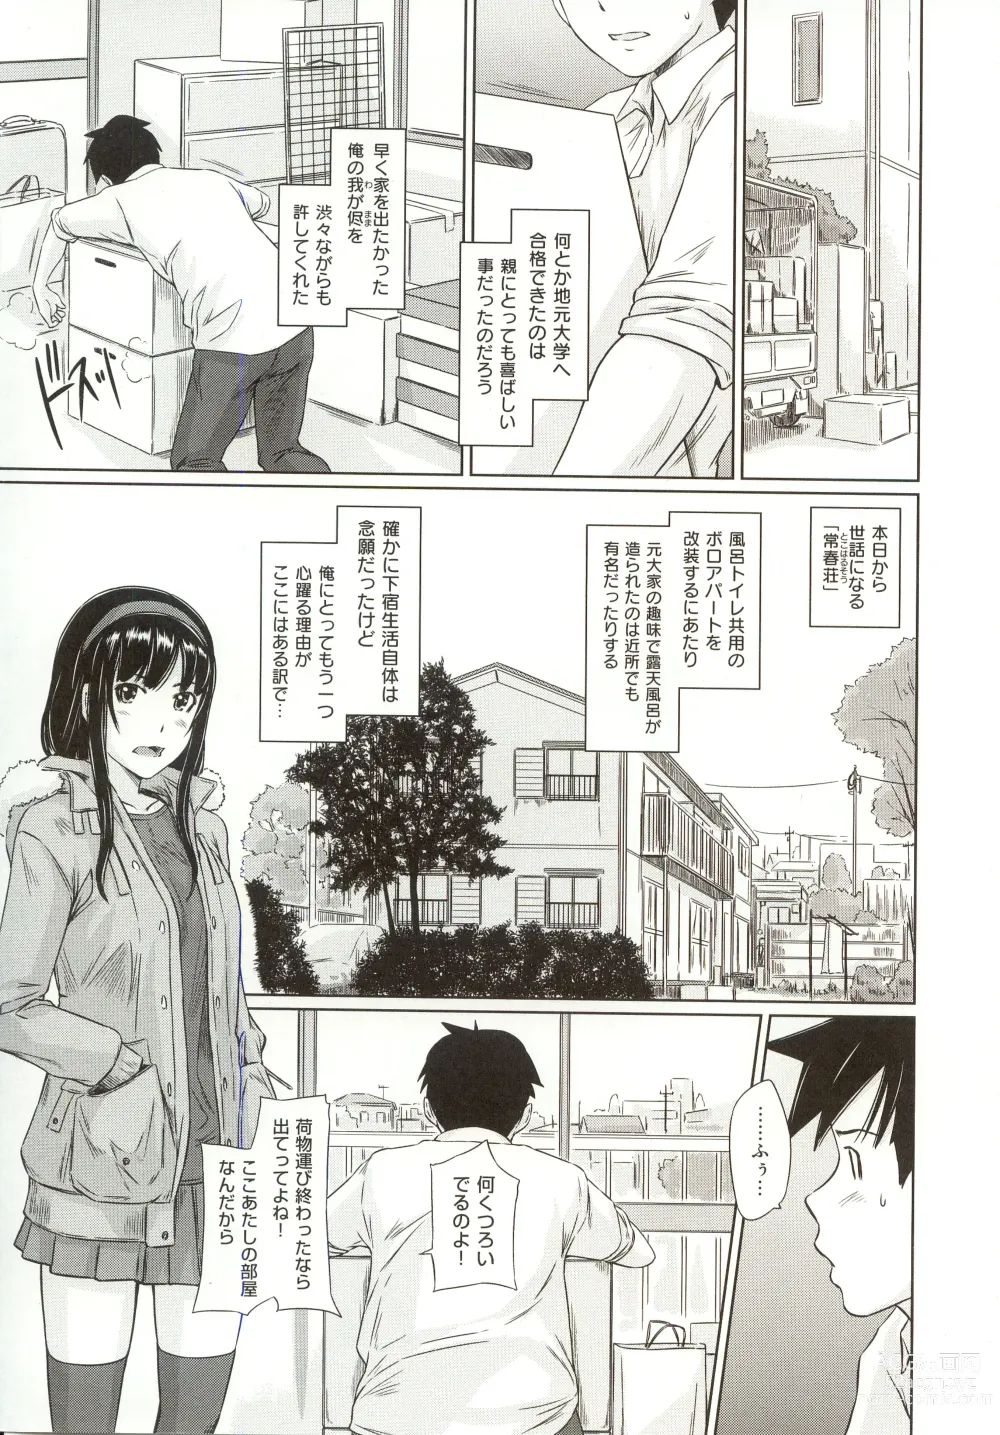 Page 10 of manga Tokoharusou e Youkoso - Welcome to the apartment of everlasting spring... come to me.